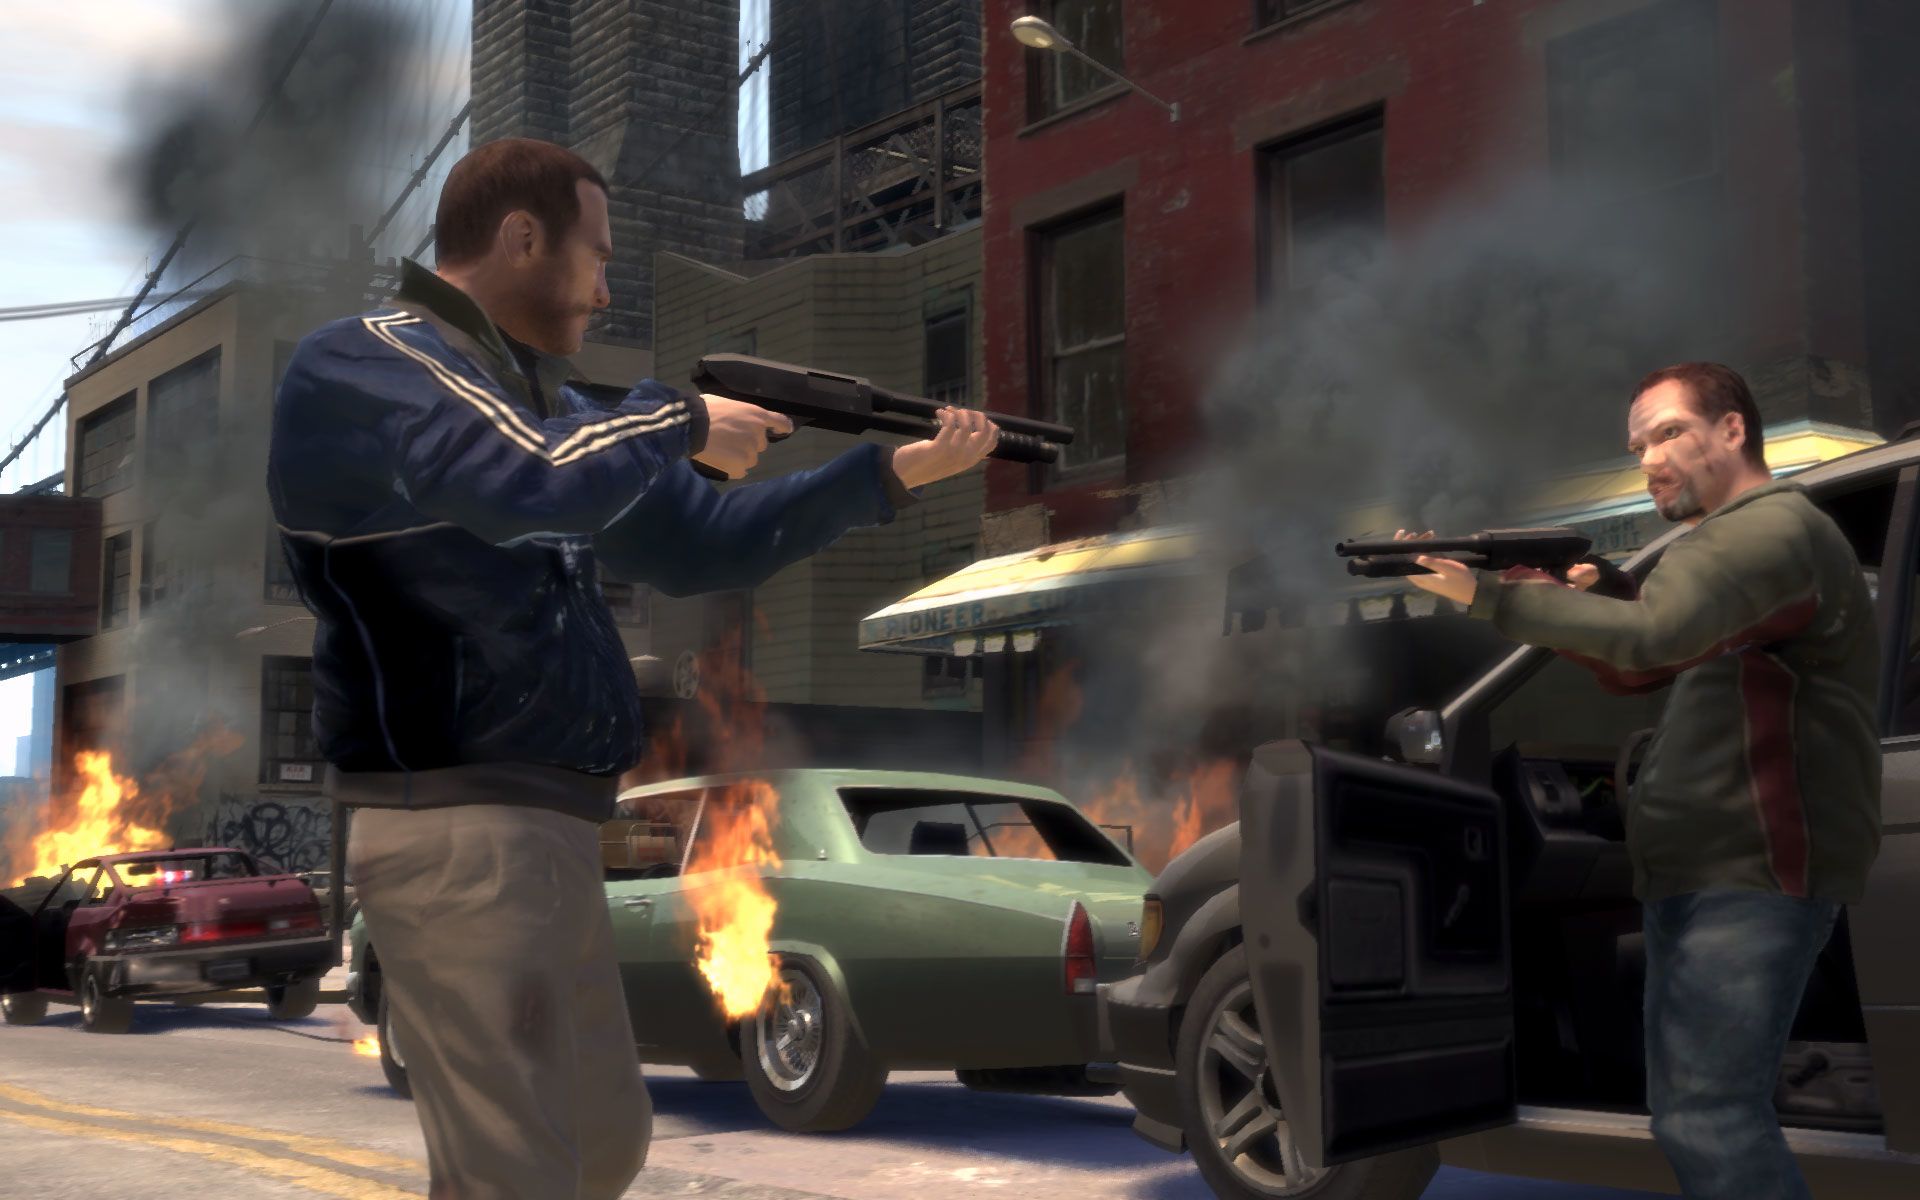 Bit Gun: Online Shooting Games Has Entered Early Access For